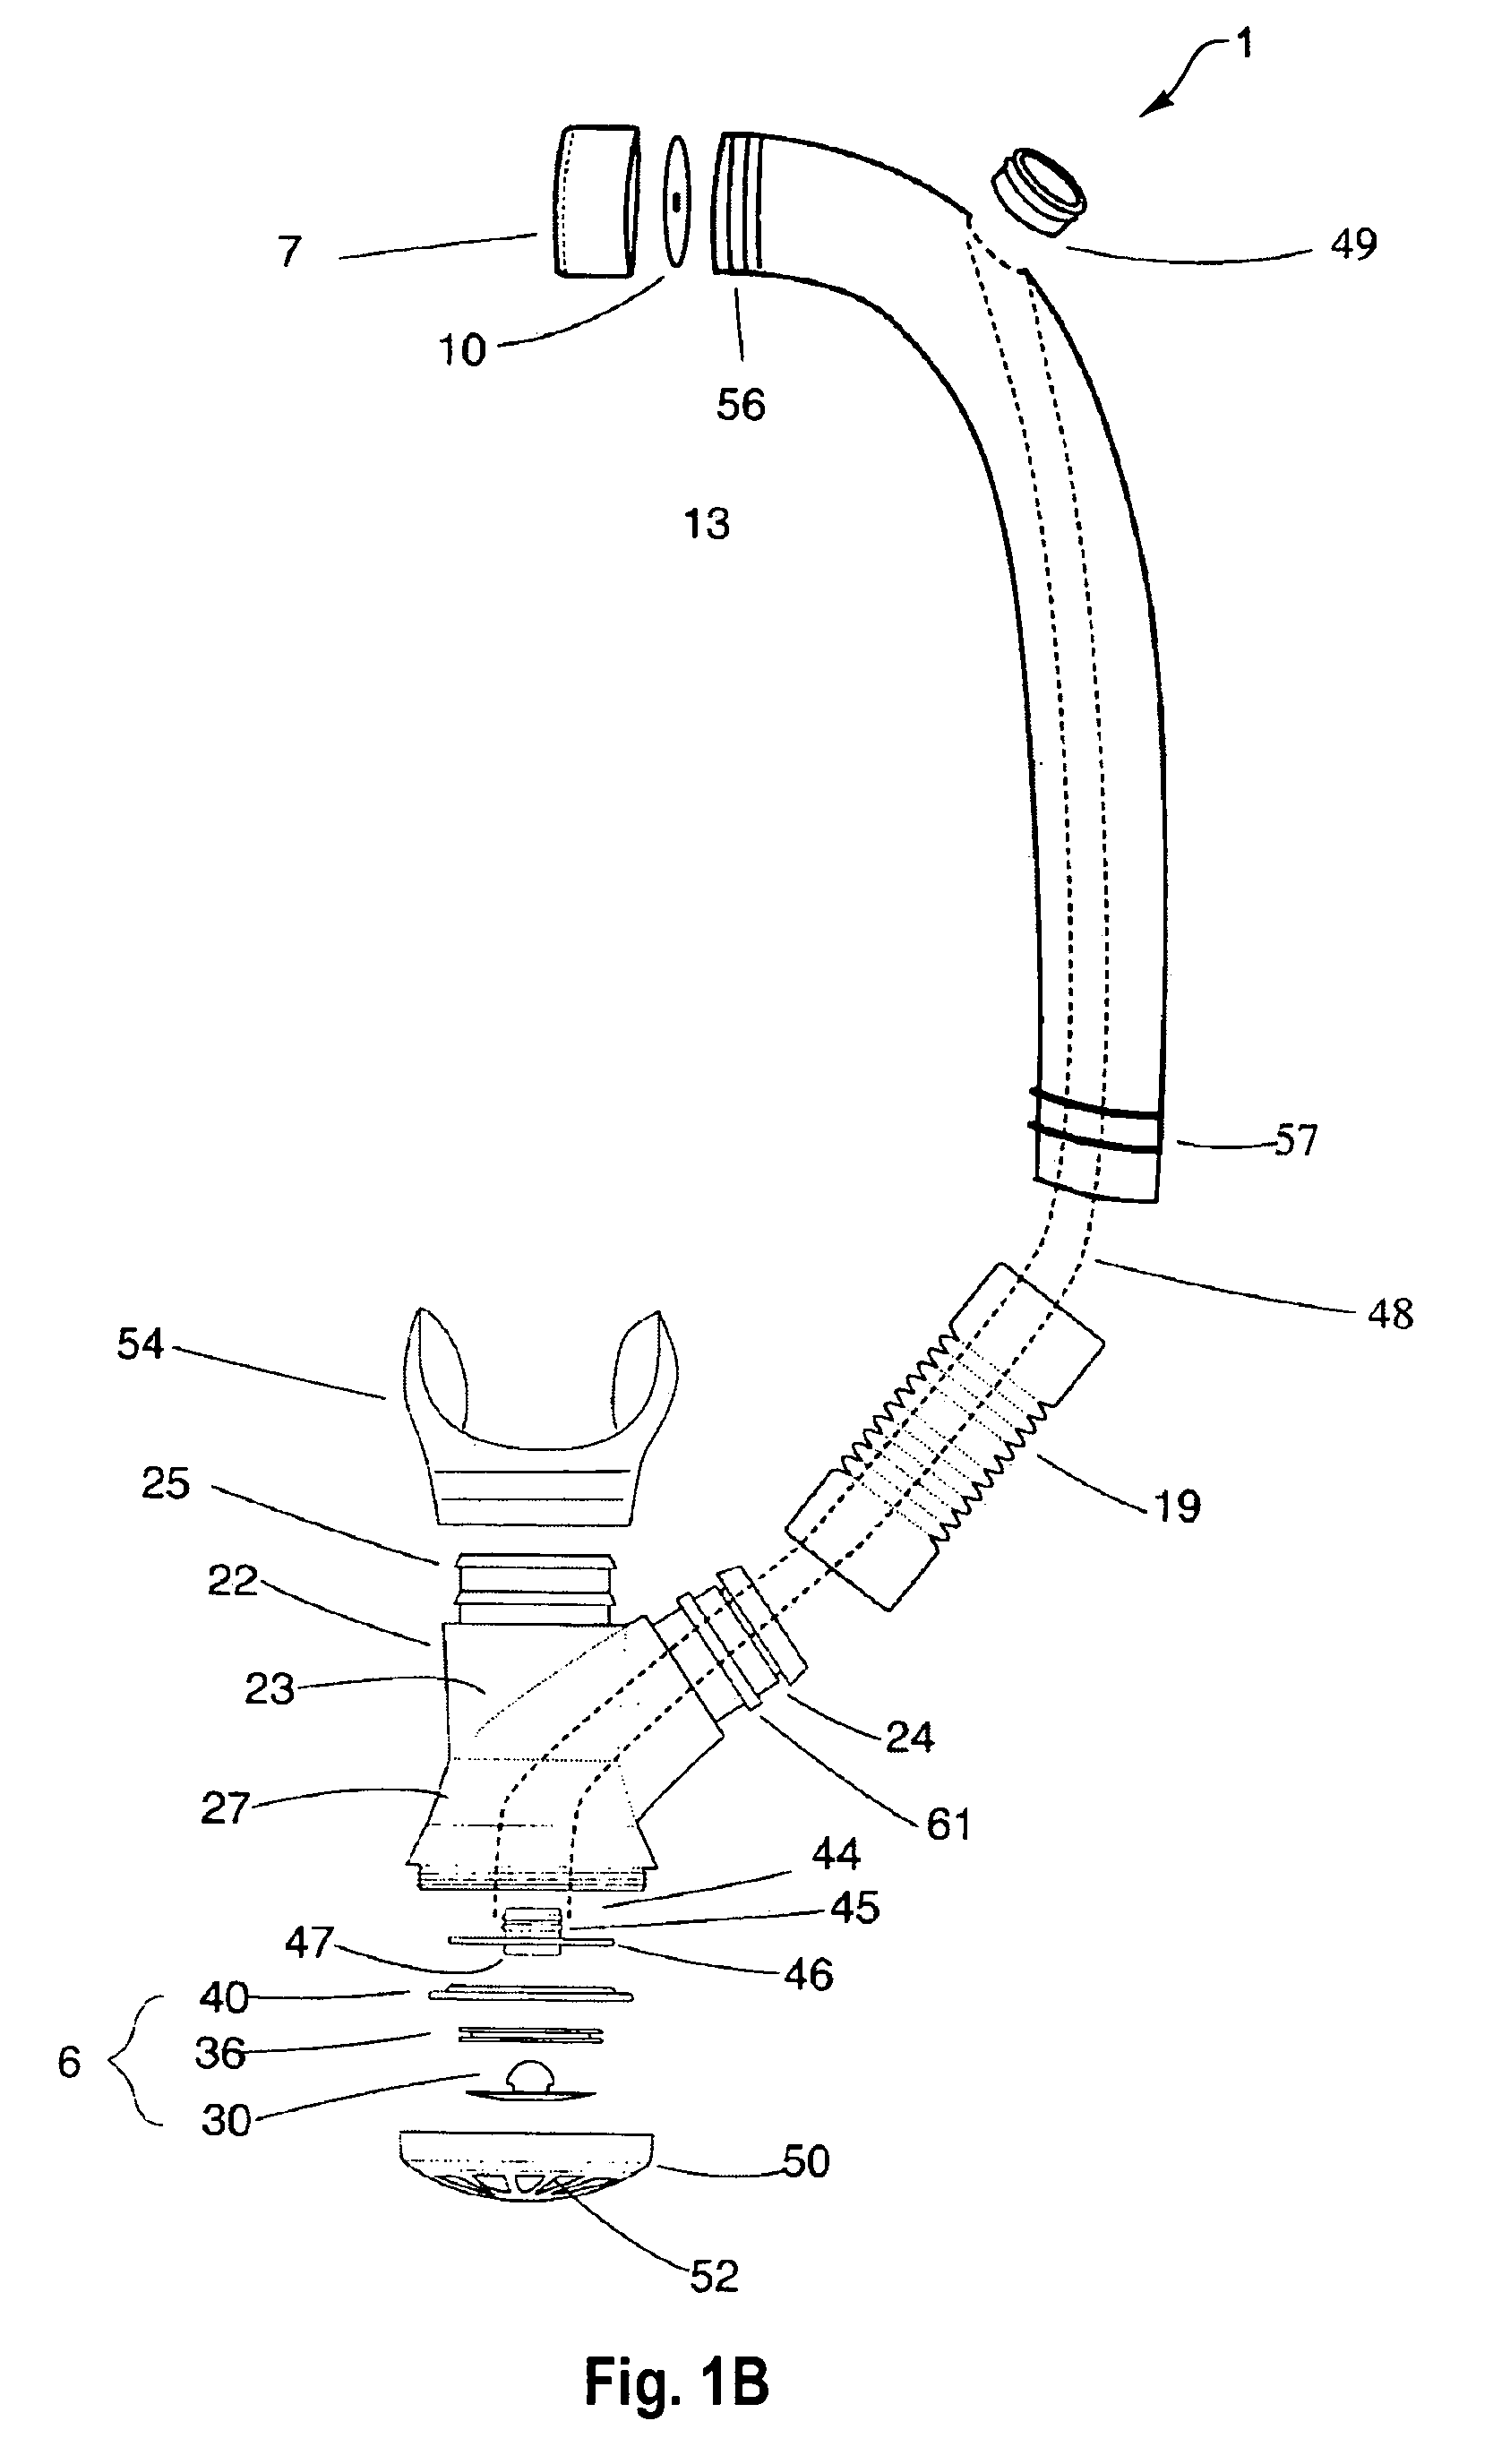 Exhalation valve for use in a breathing device